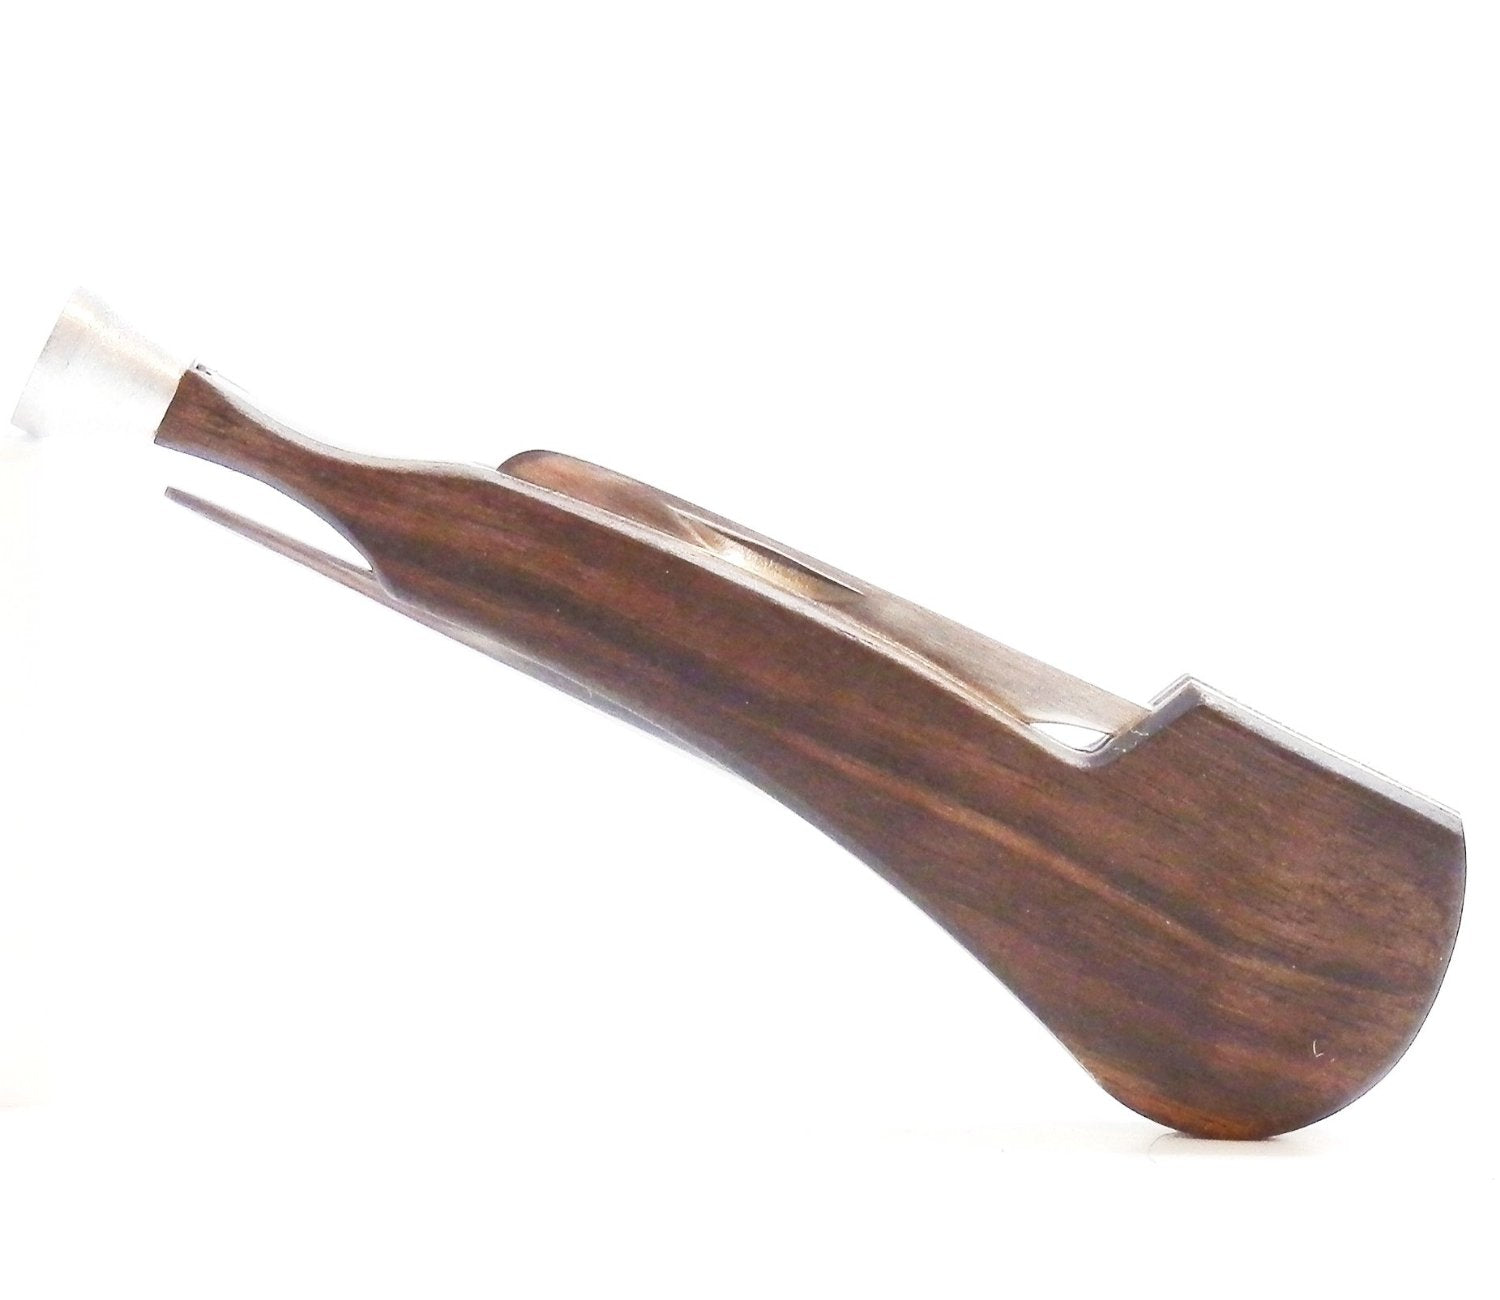 Tobacco Pipe 3-in-1 Tool - Classic Wood & Stainless Steel - Tamper, Reamer & Pic